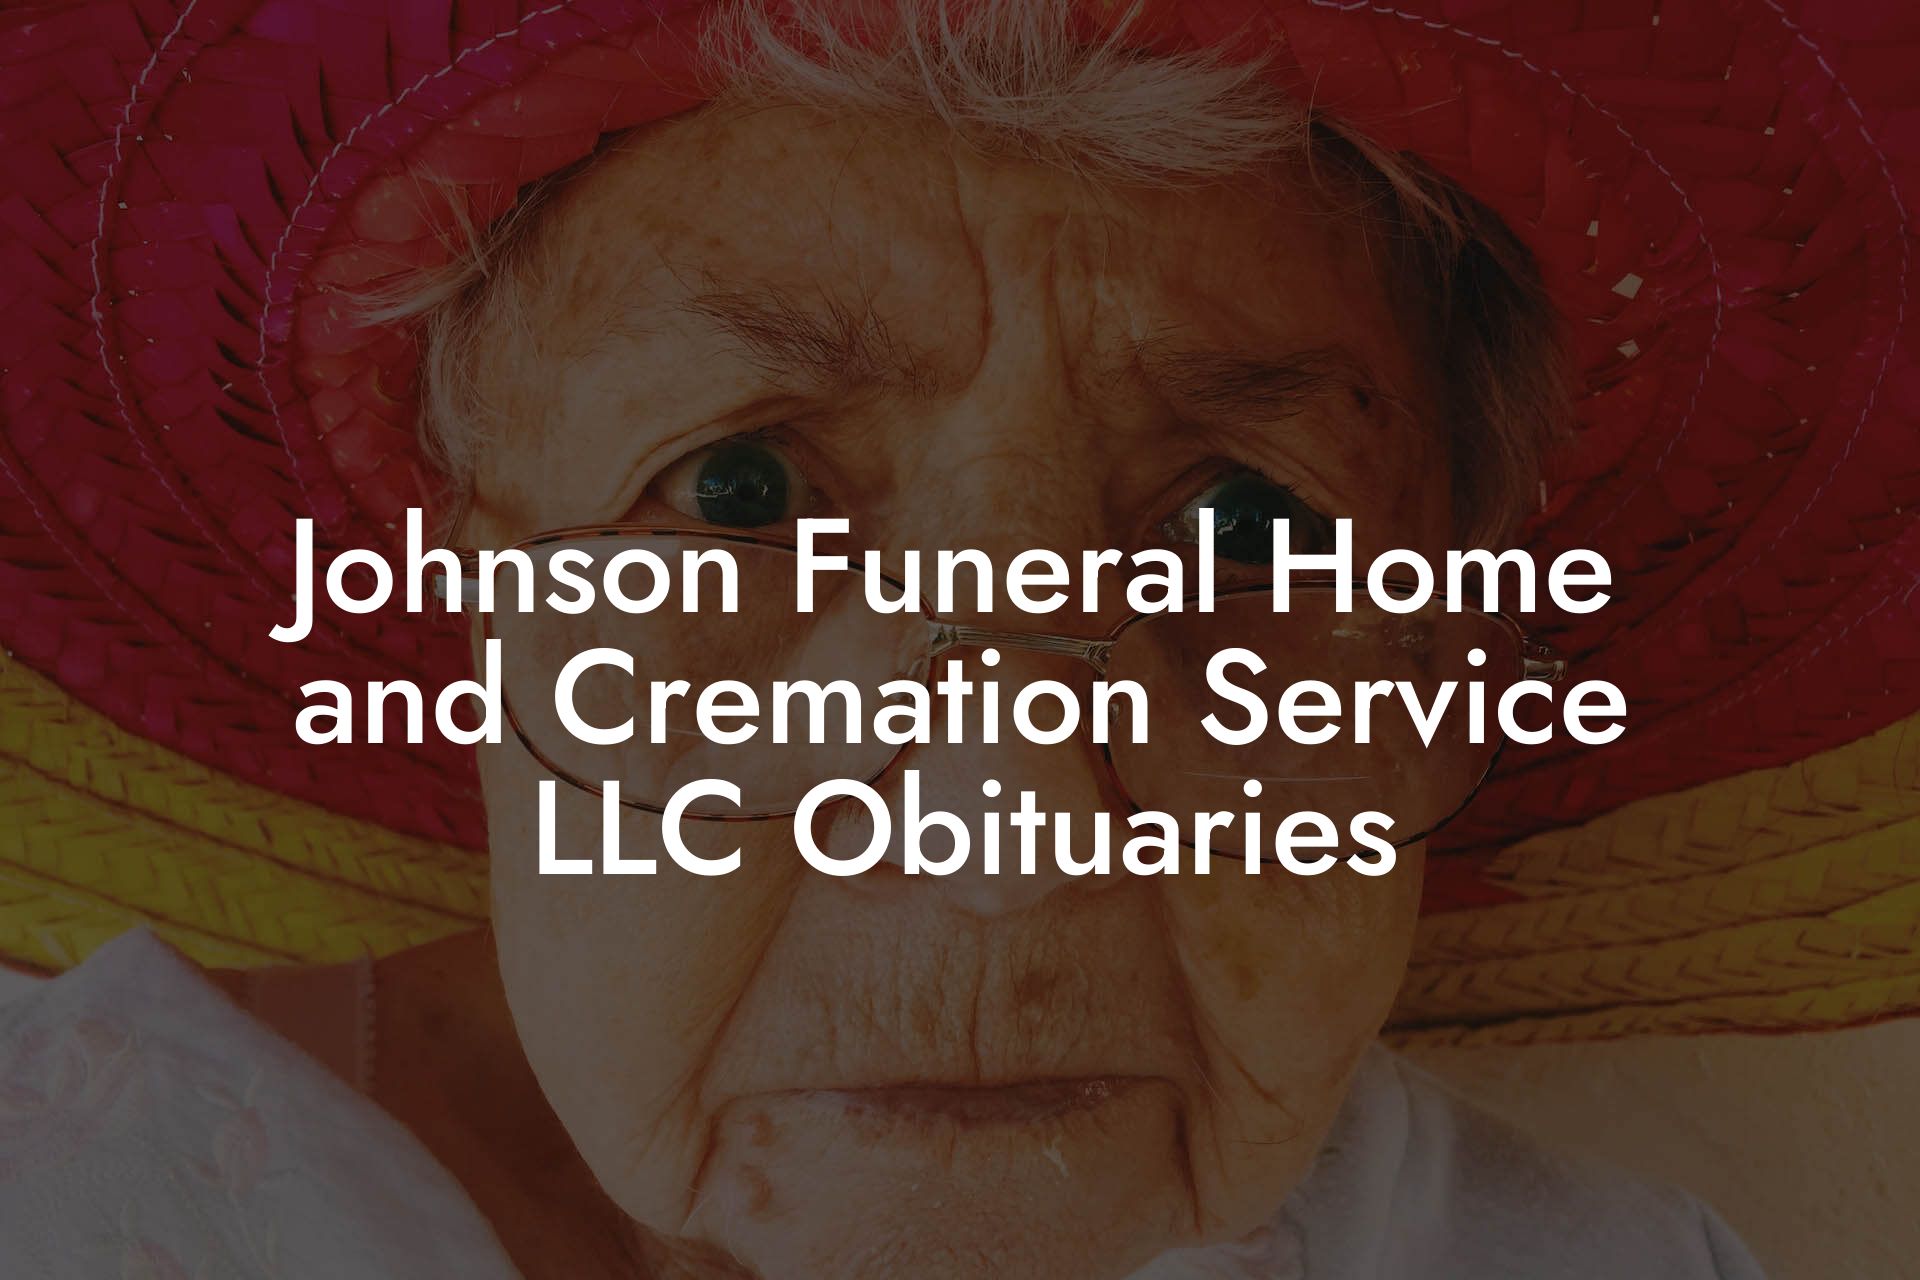 Johnson Funeral Home and Cremation Service LLC Obituaries